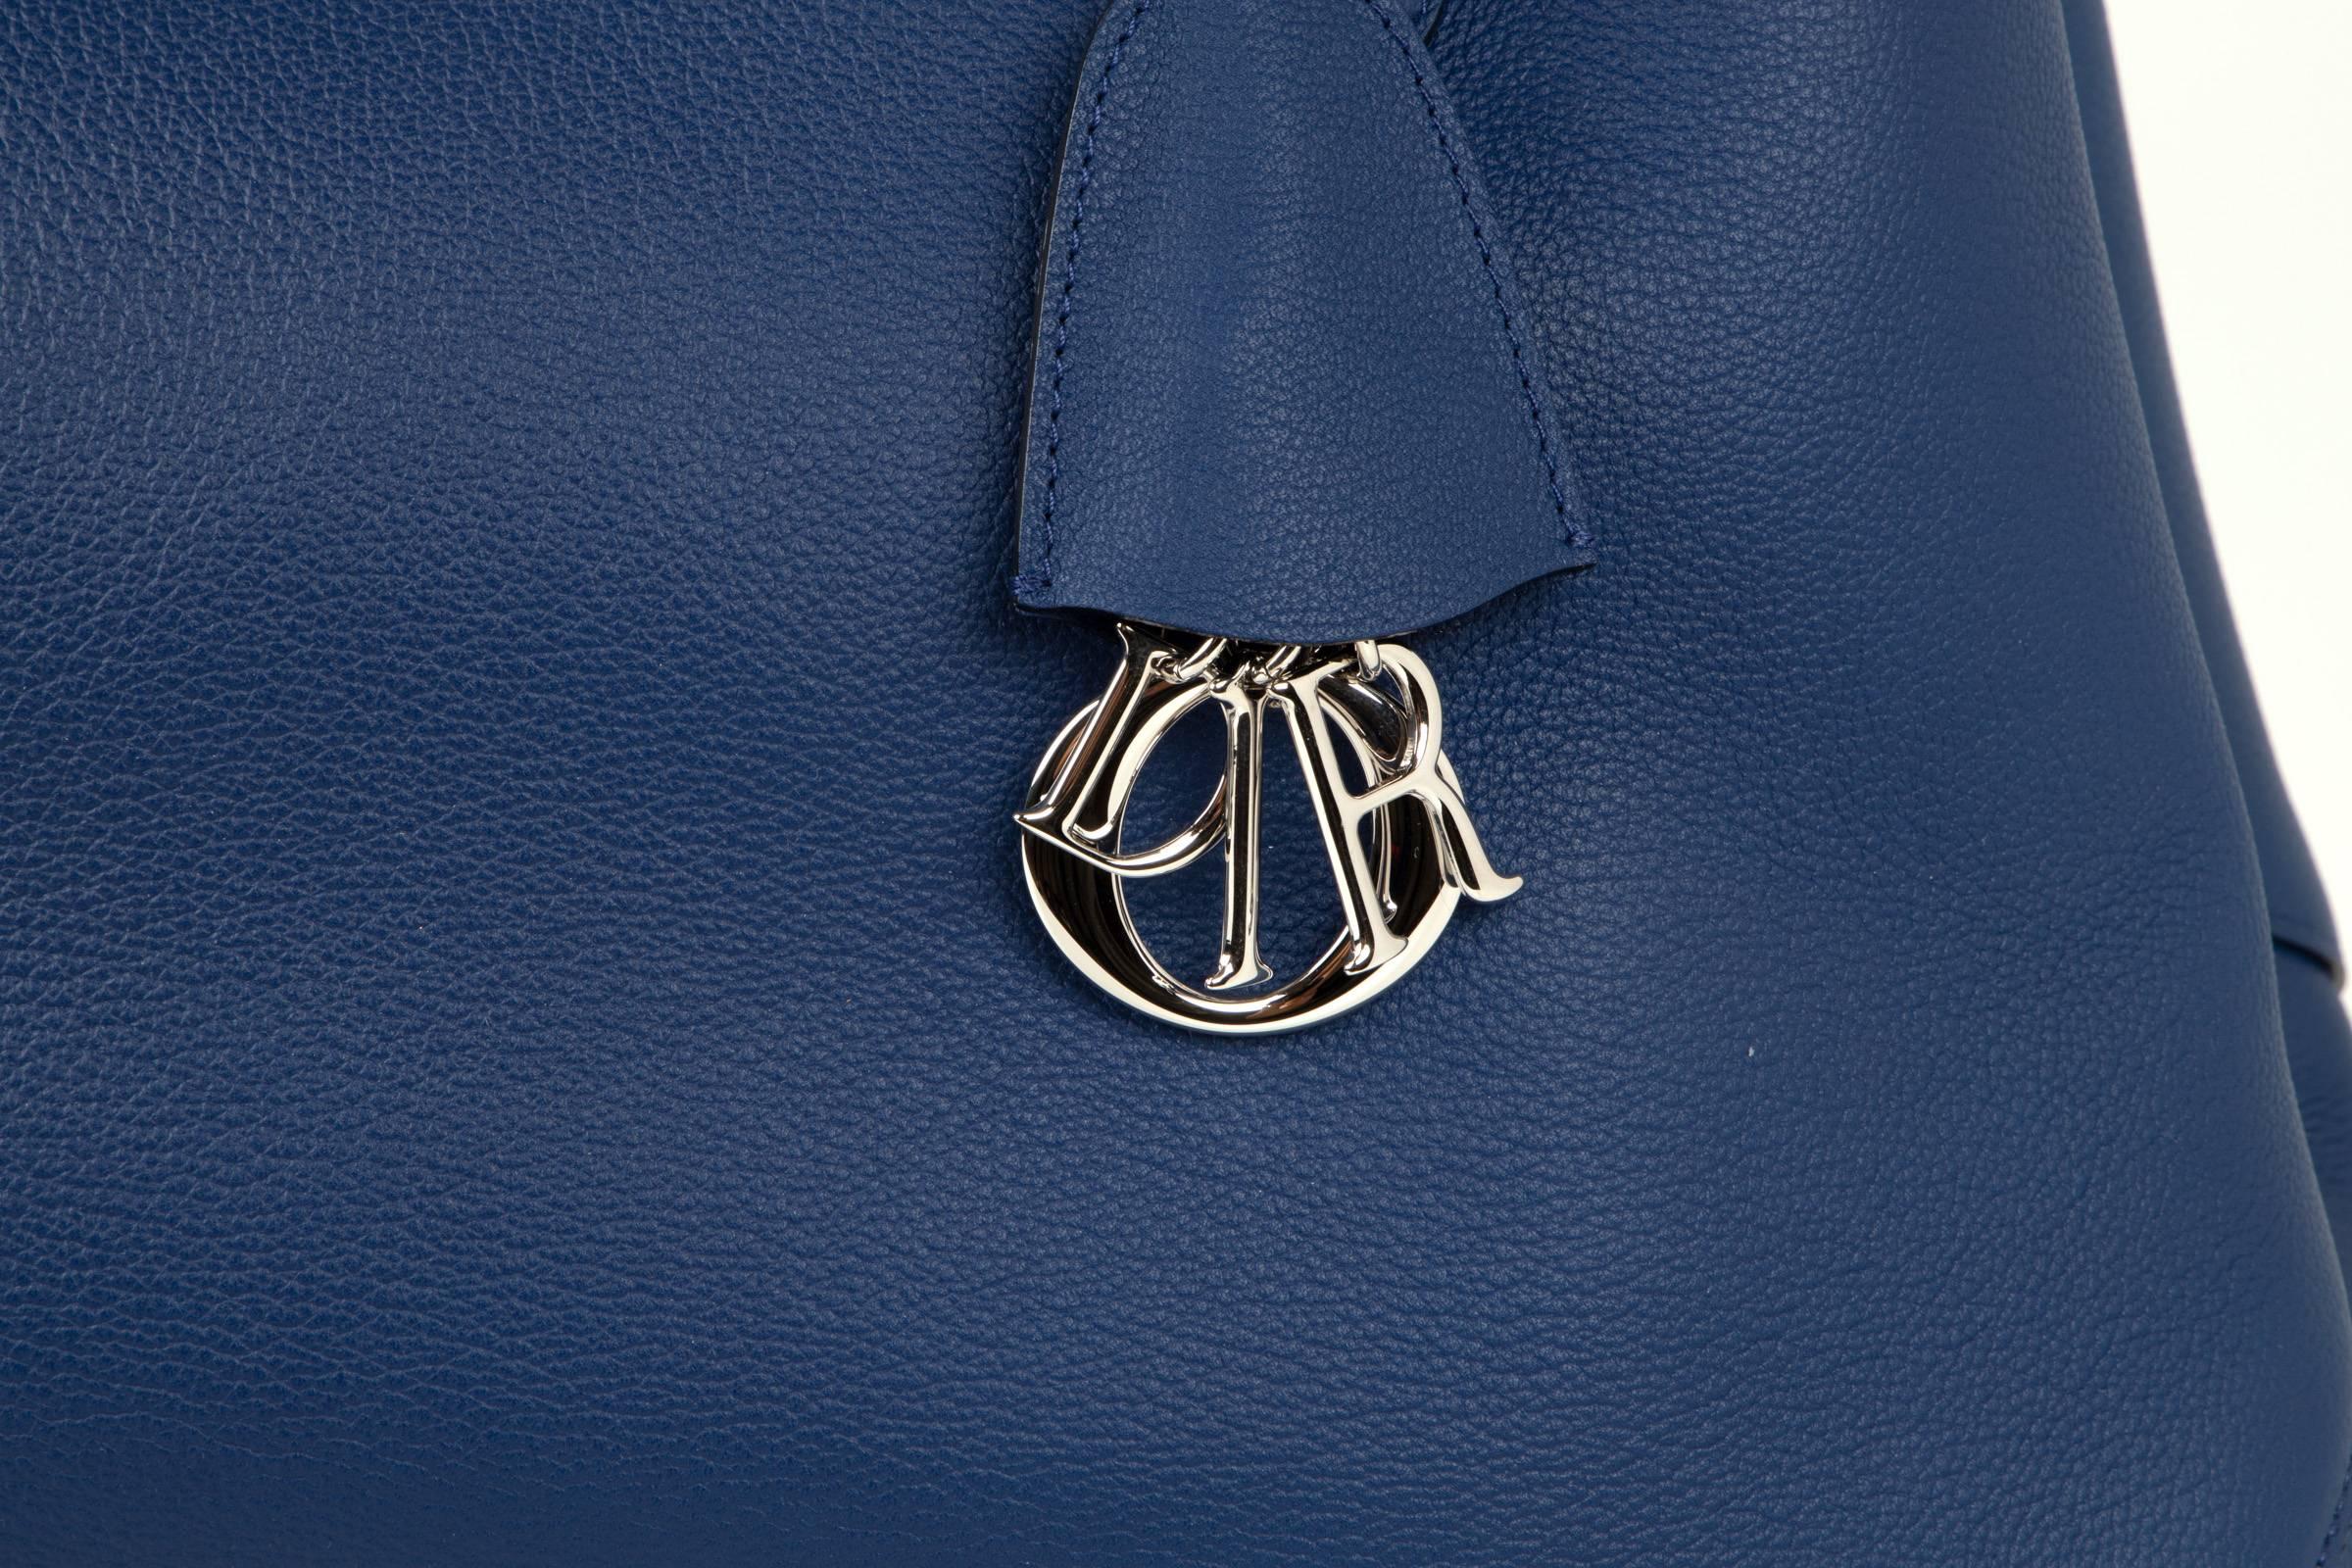 Guaranteed authentic Christian Dior Blue Open Bar tote bag.
Rich vivid blue with contrasting light blue interior. 
Clochette reveals the iconic Dior charms.
Tote has straps inside with silver turn key. 
2 interior slot pockets and 1 snap pocket for